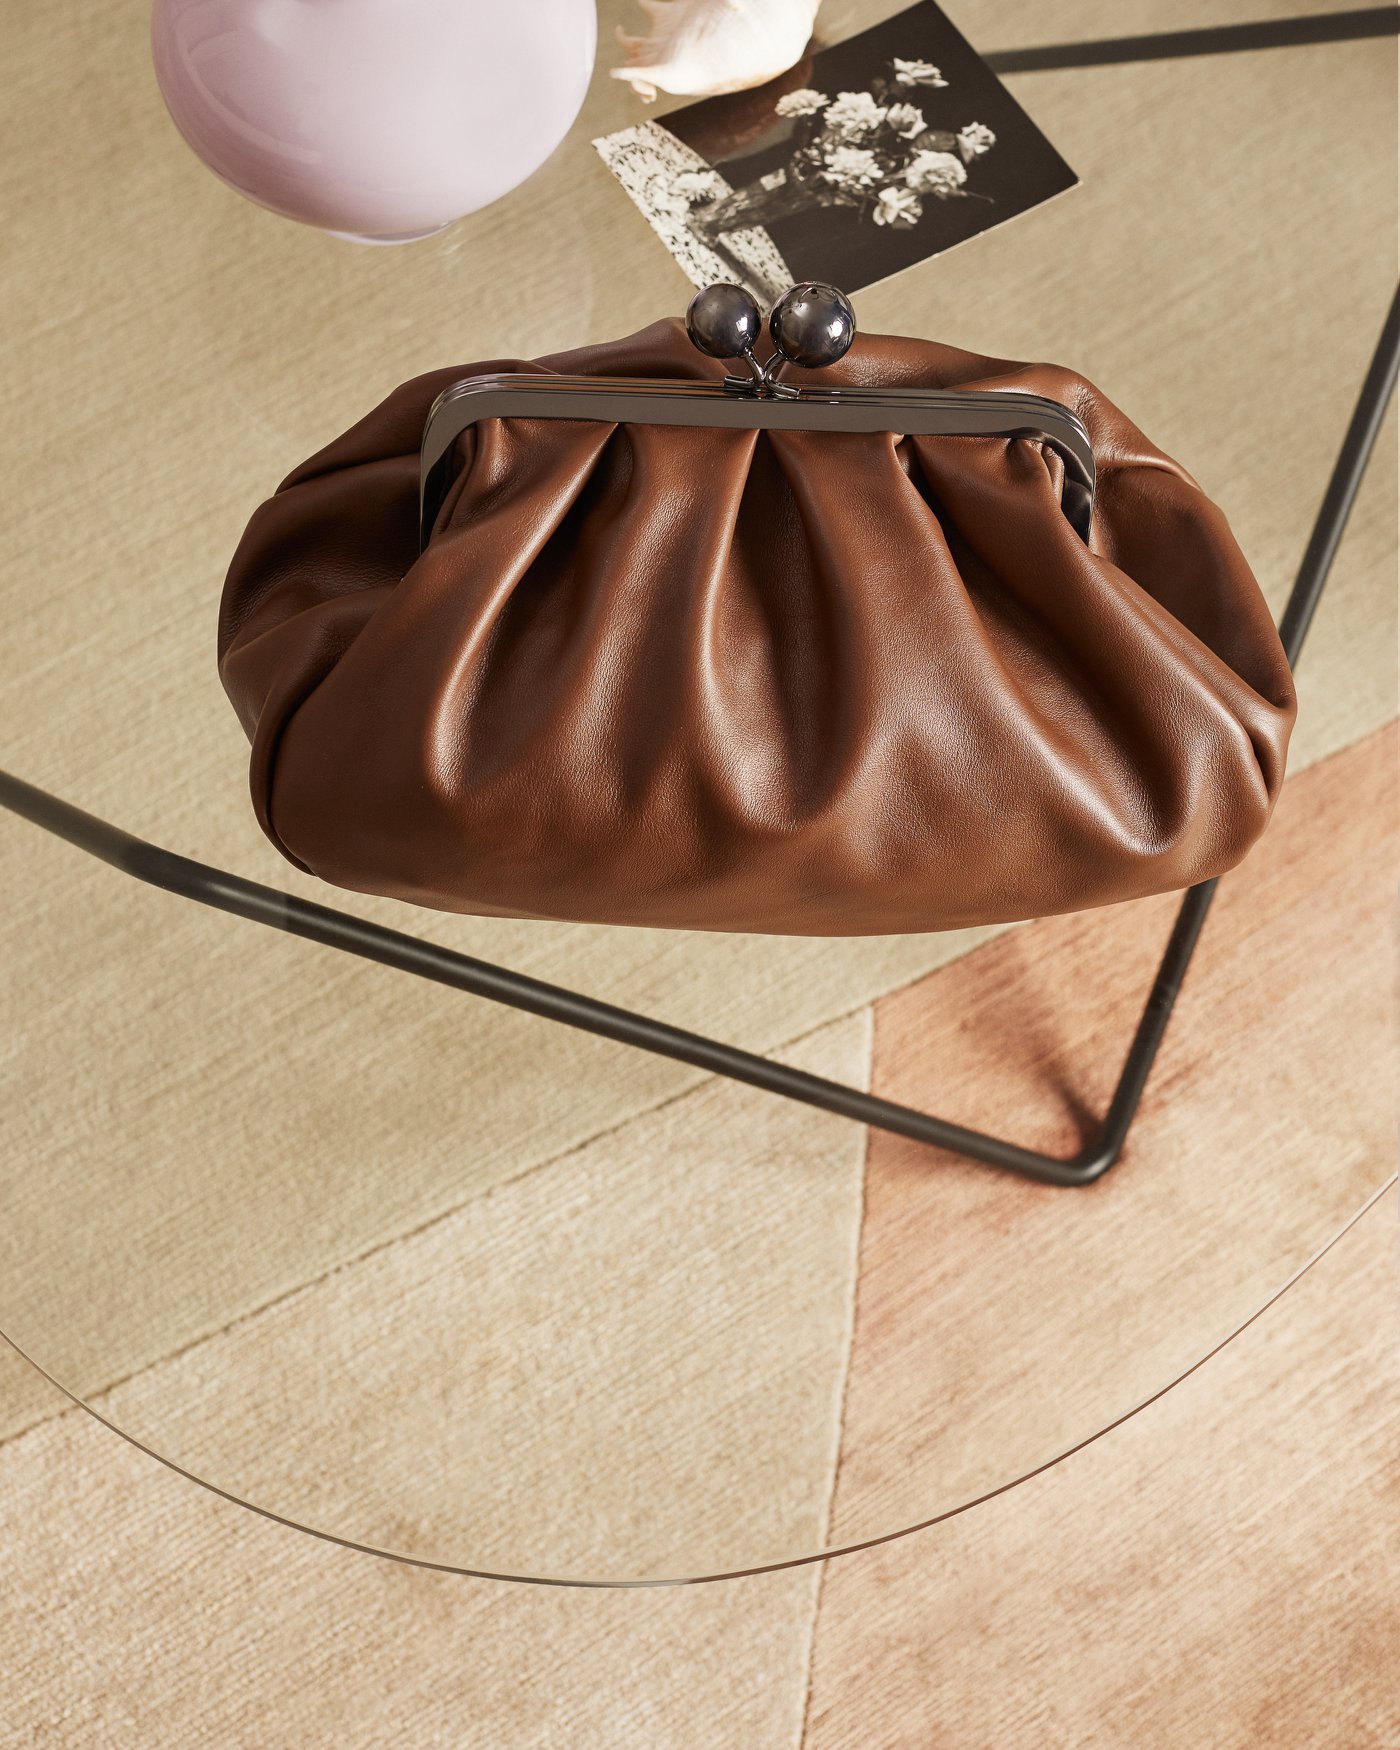 The chocolate brown passepartout. Rich and tasty, a Pasticcino Bag never shies away. See more